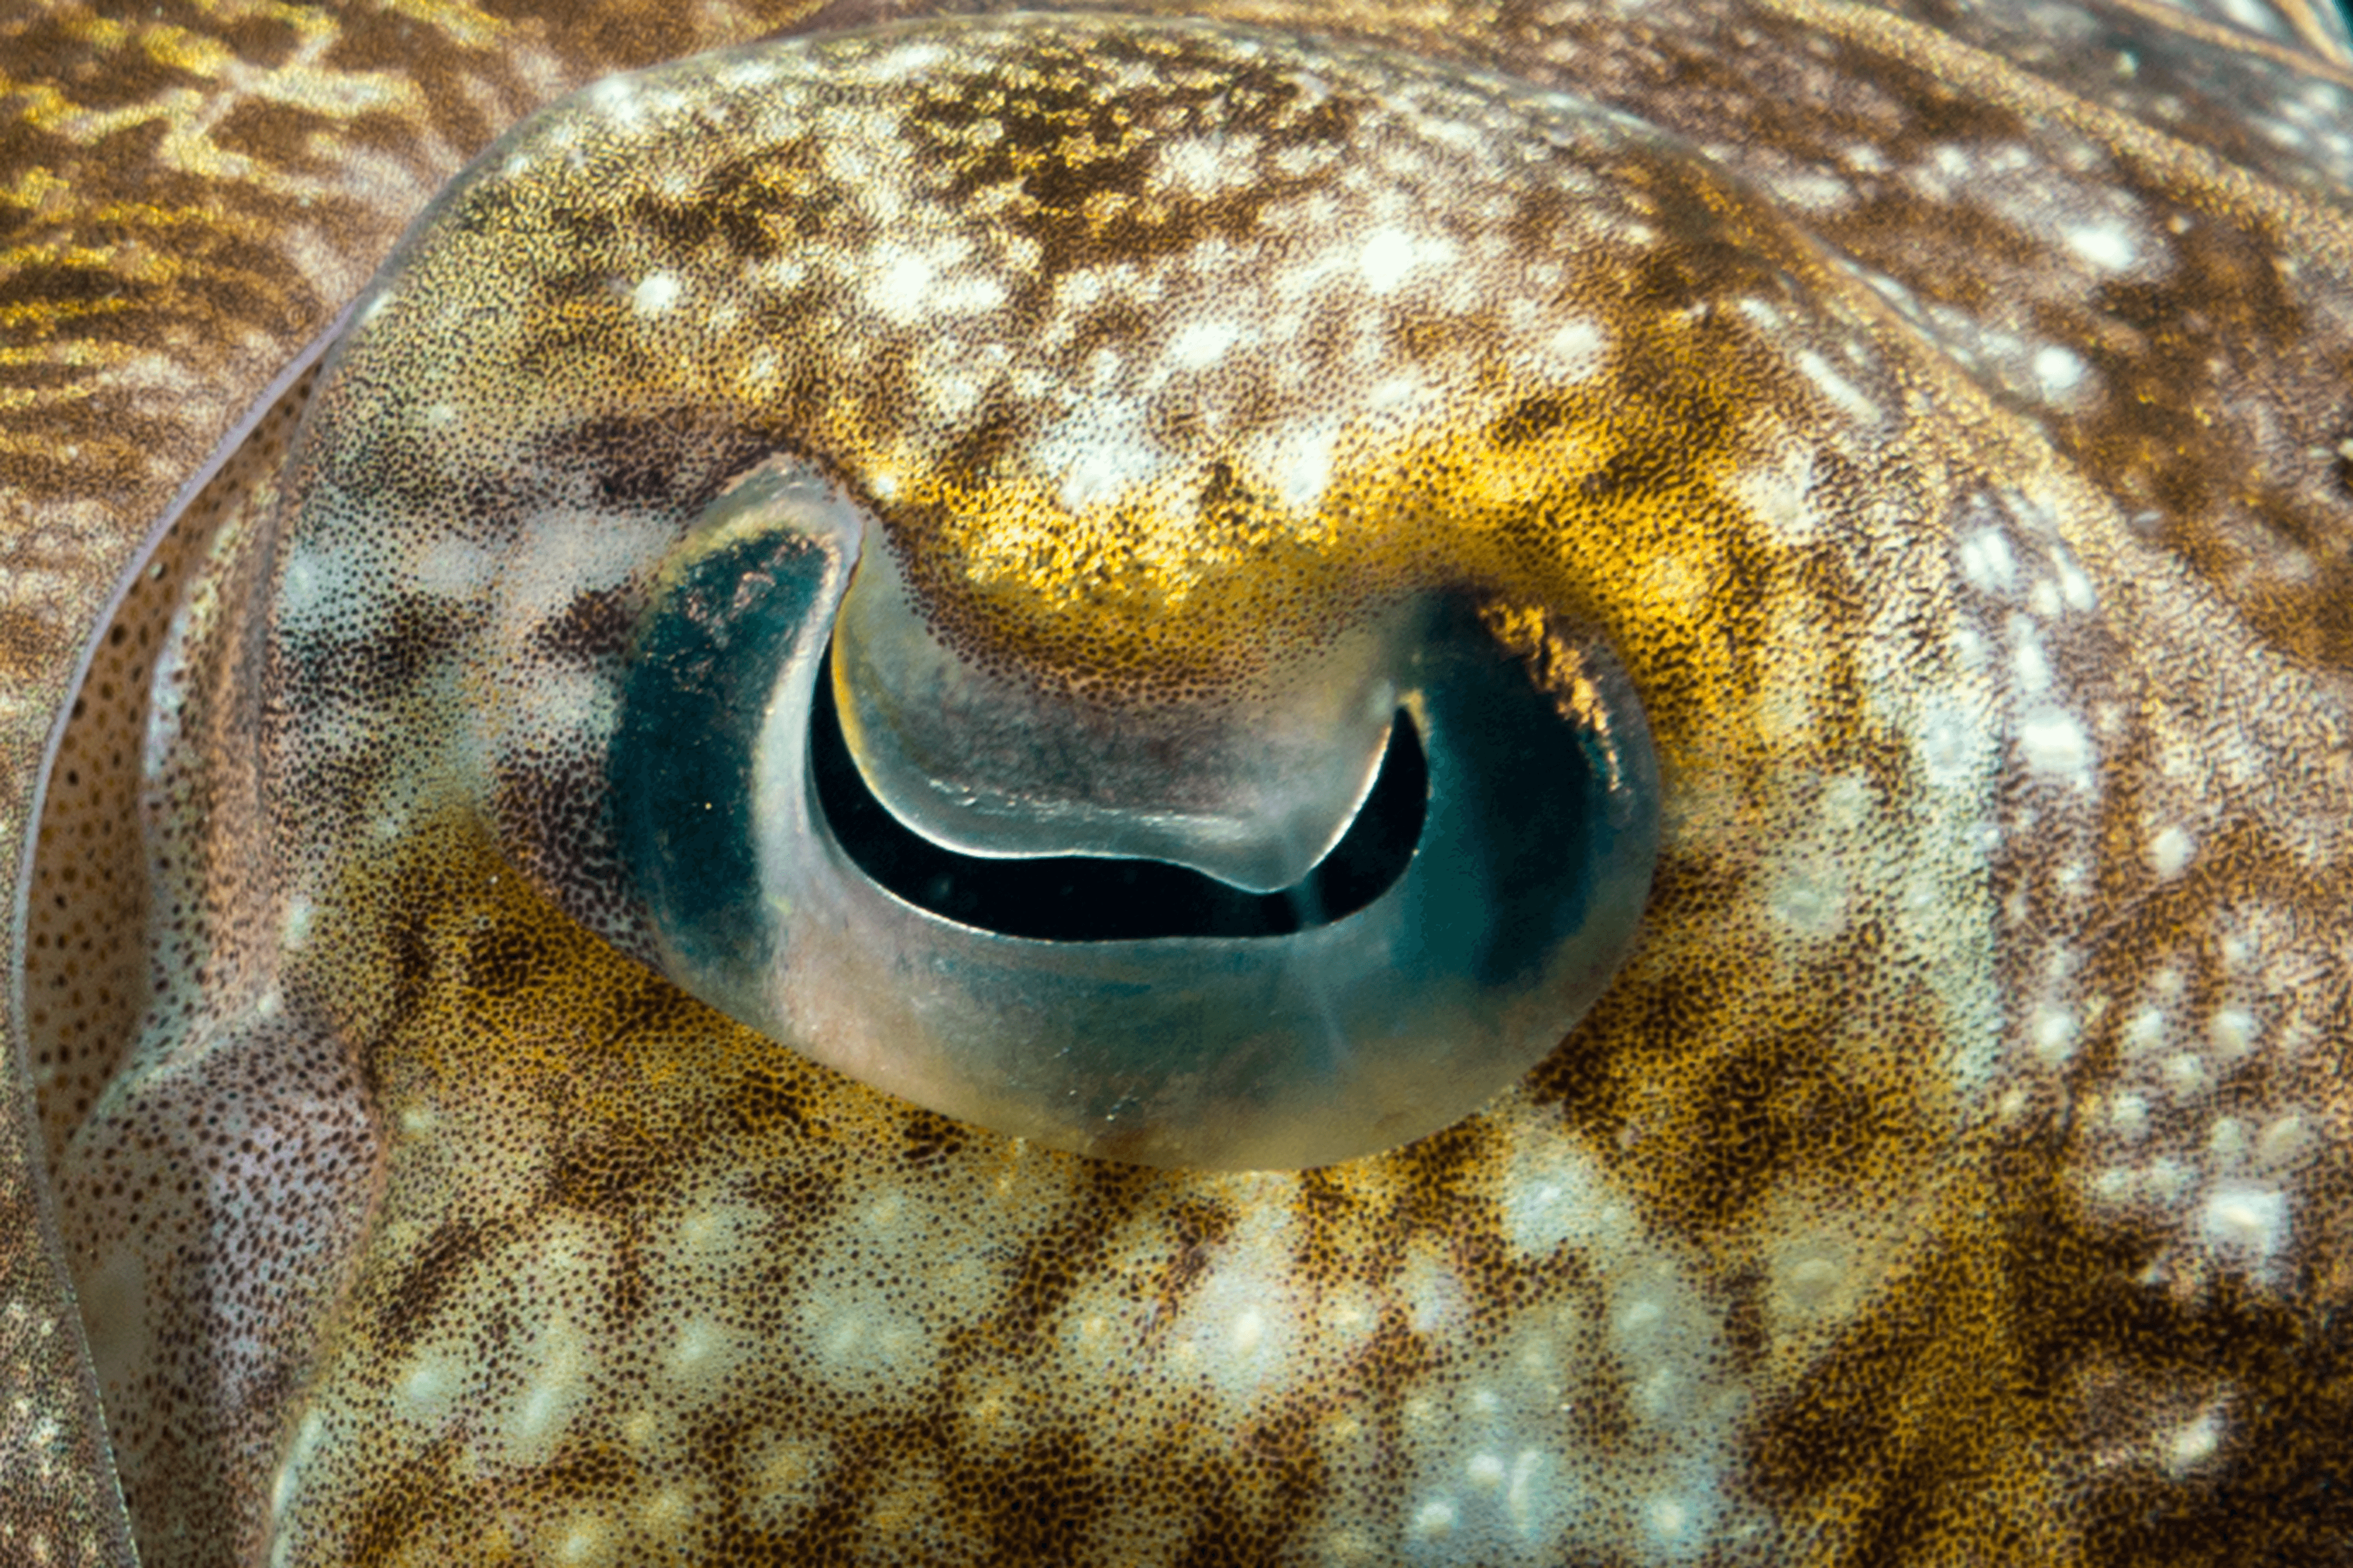 The eye of a cuttlefish